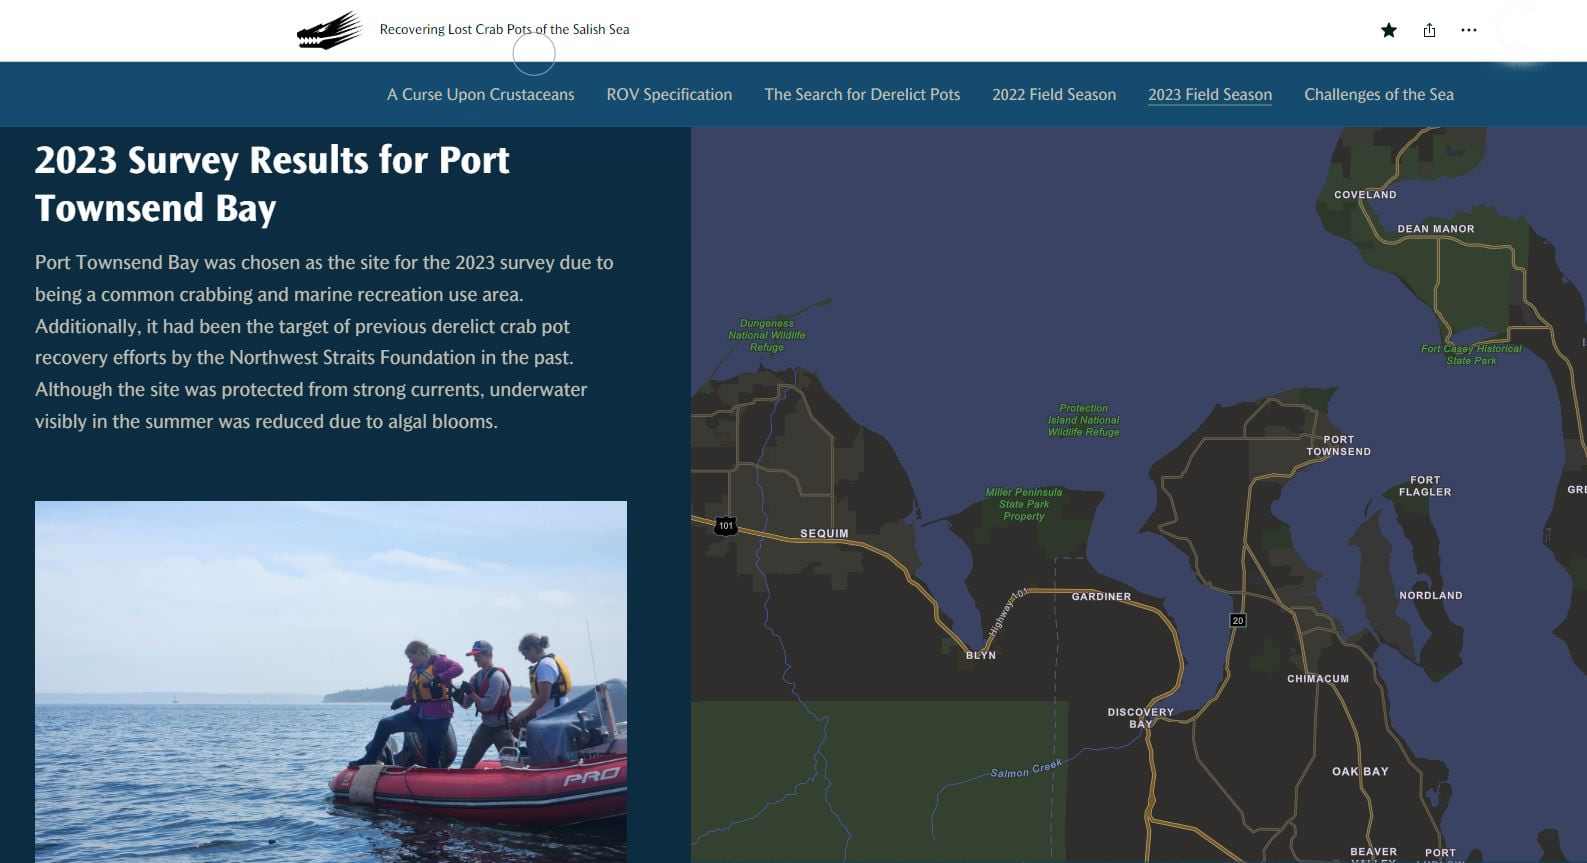 Recovering Lost Crab Pots of the Salish Sea uses the sidecar block throughout the story to reveal maps and media slowly with related narrative text